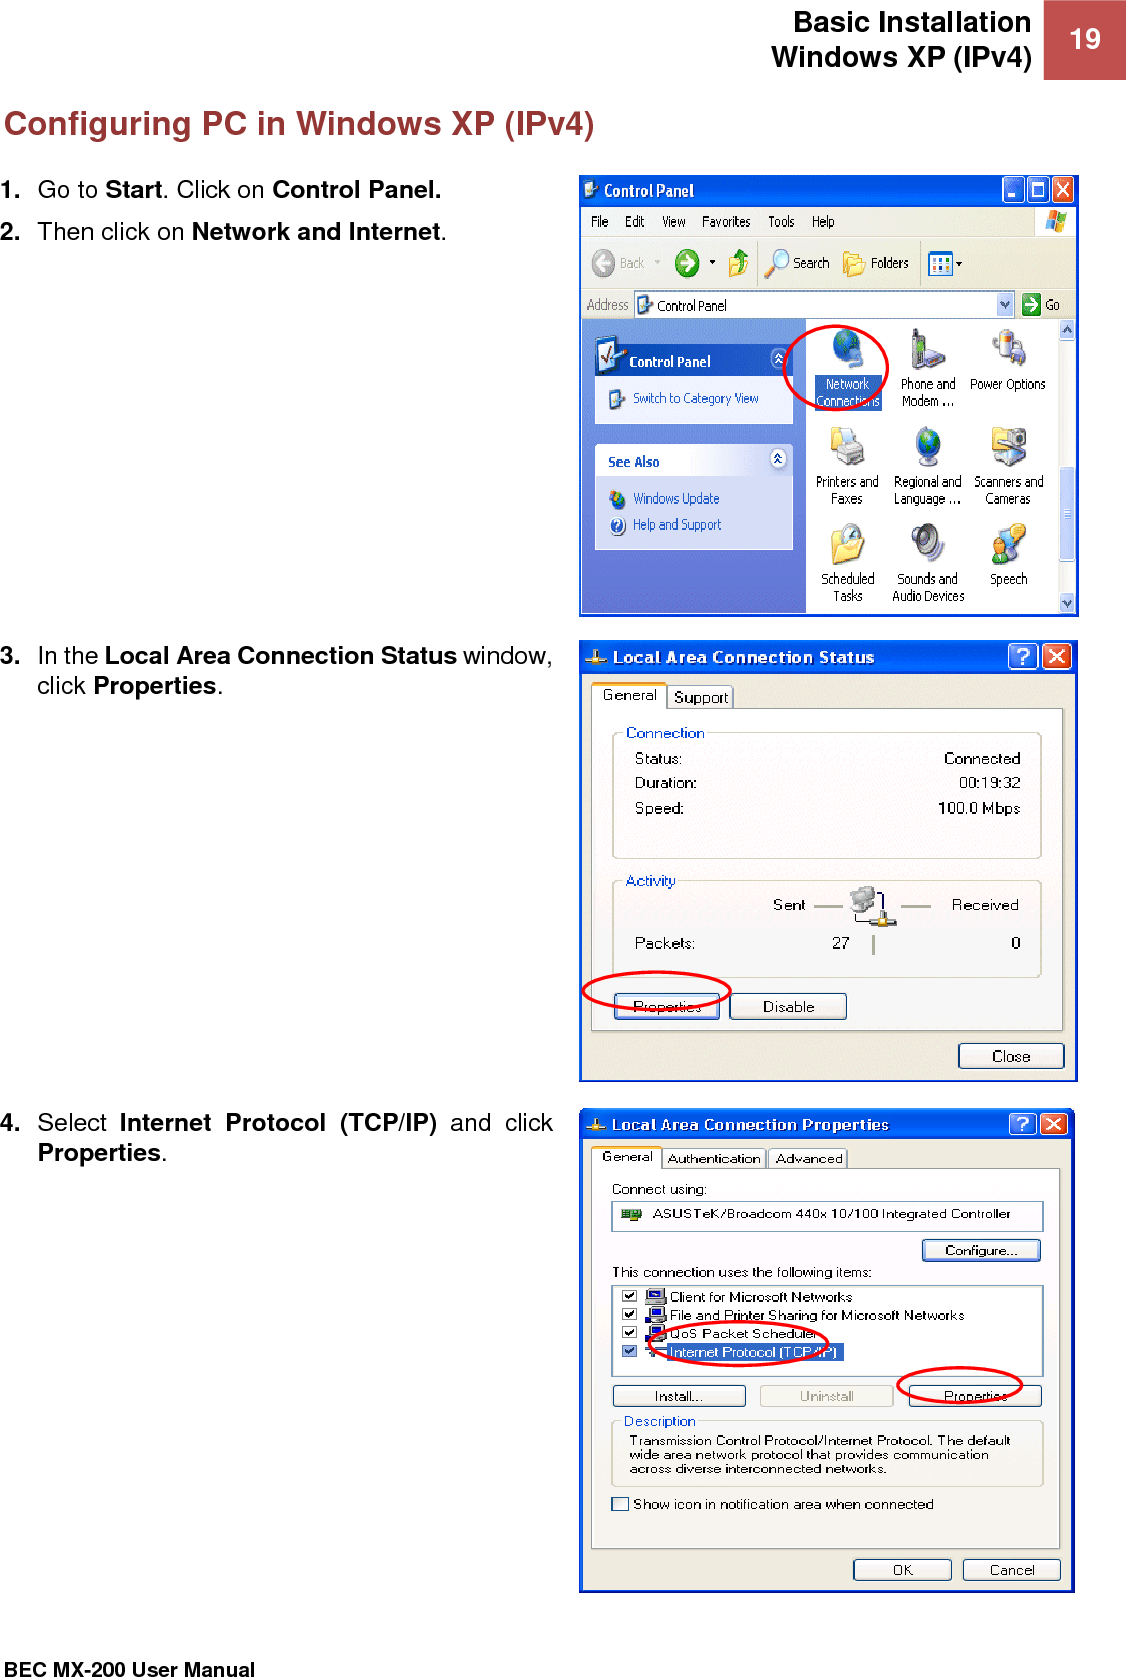 Basic Installation Windows XP (IPv4) 19   BEC MX-200 User Manual  Configuring PC in Windows XP (IPv4) 1. Go to Start. Click on Control Panel. 2. Then click on Network and Internet.   3. In the Local Area Connection Status window, click Properties.  4. Select  Internet  Protocol  (TCP/IP)  and  click Properties.  